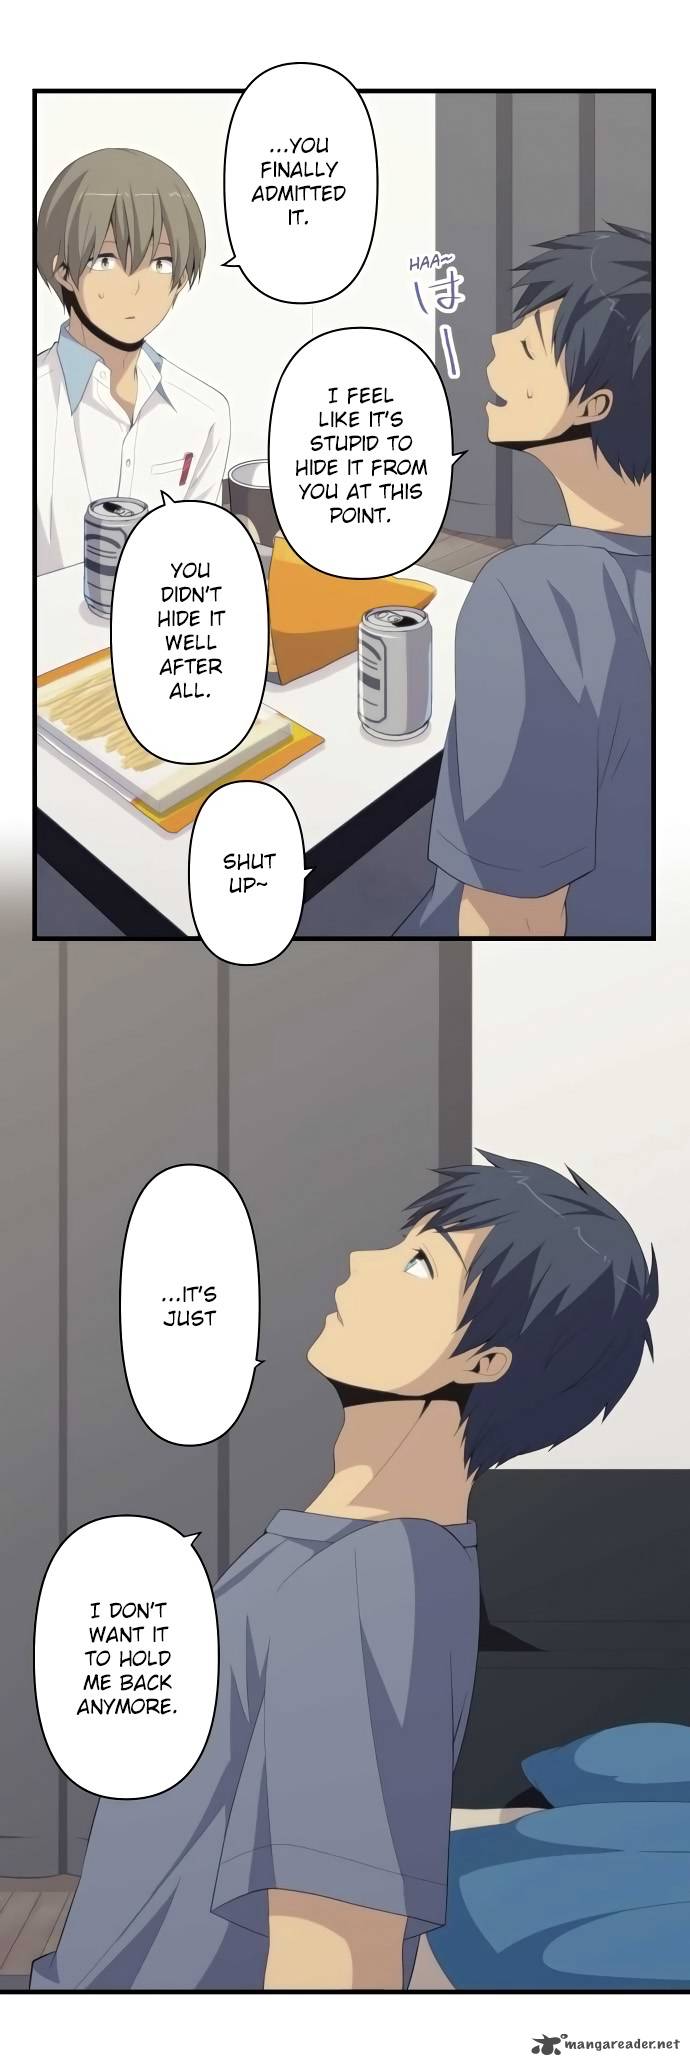 Relife 154 7